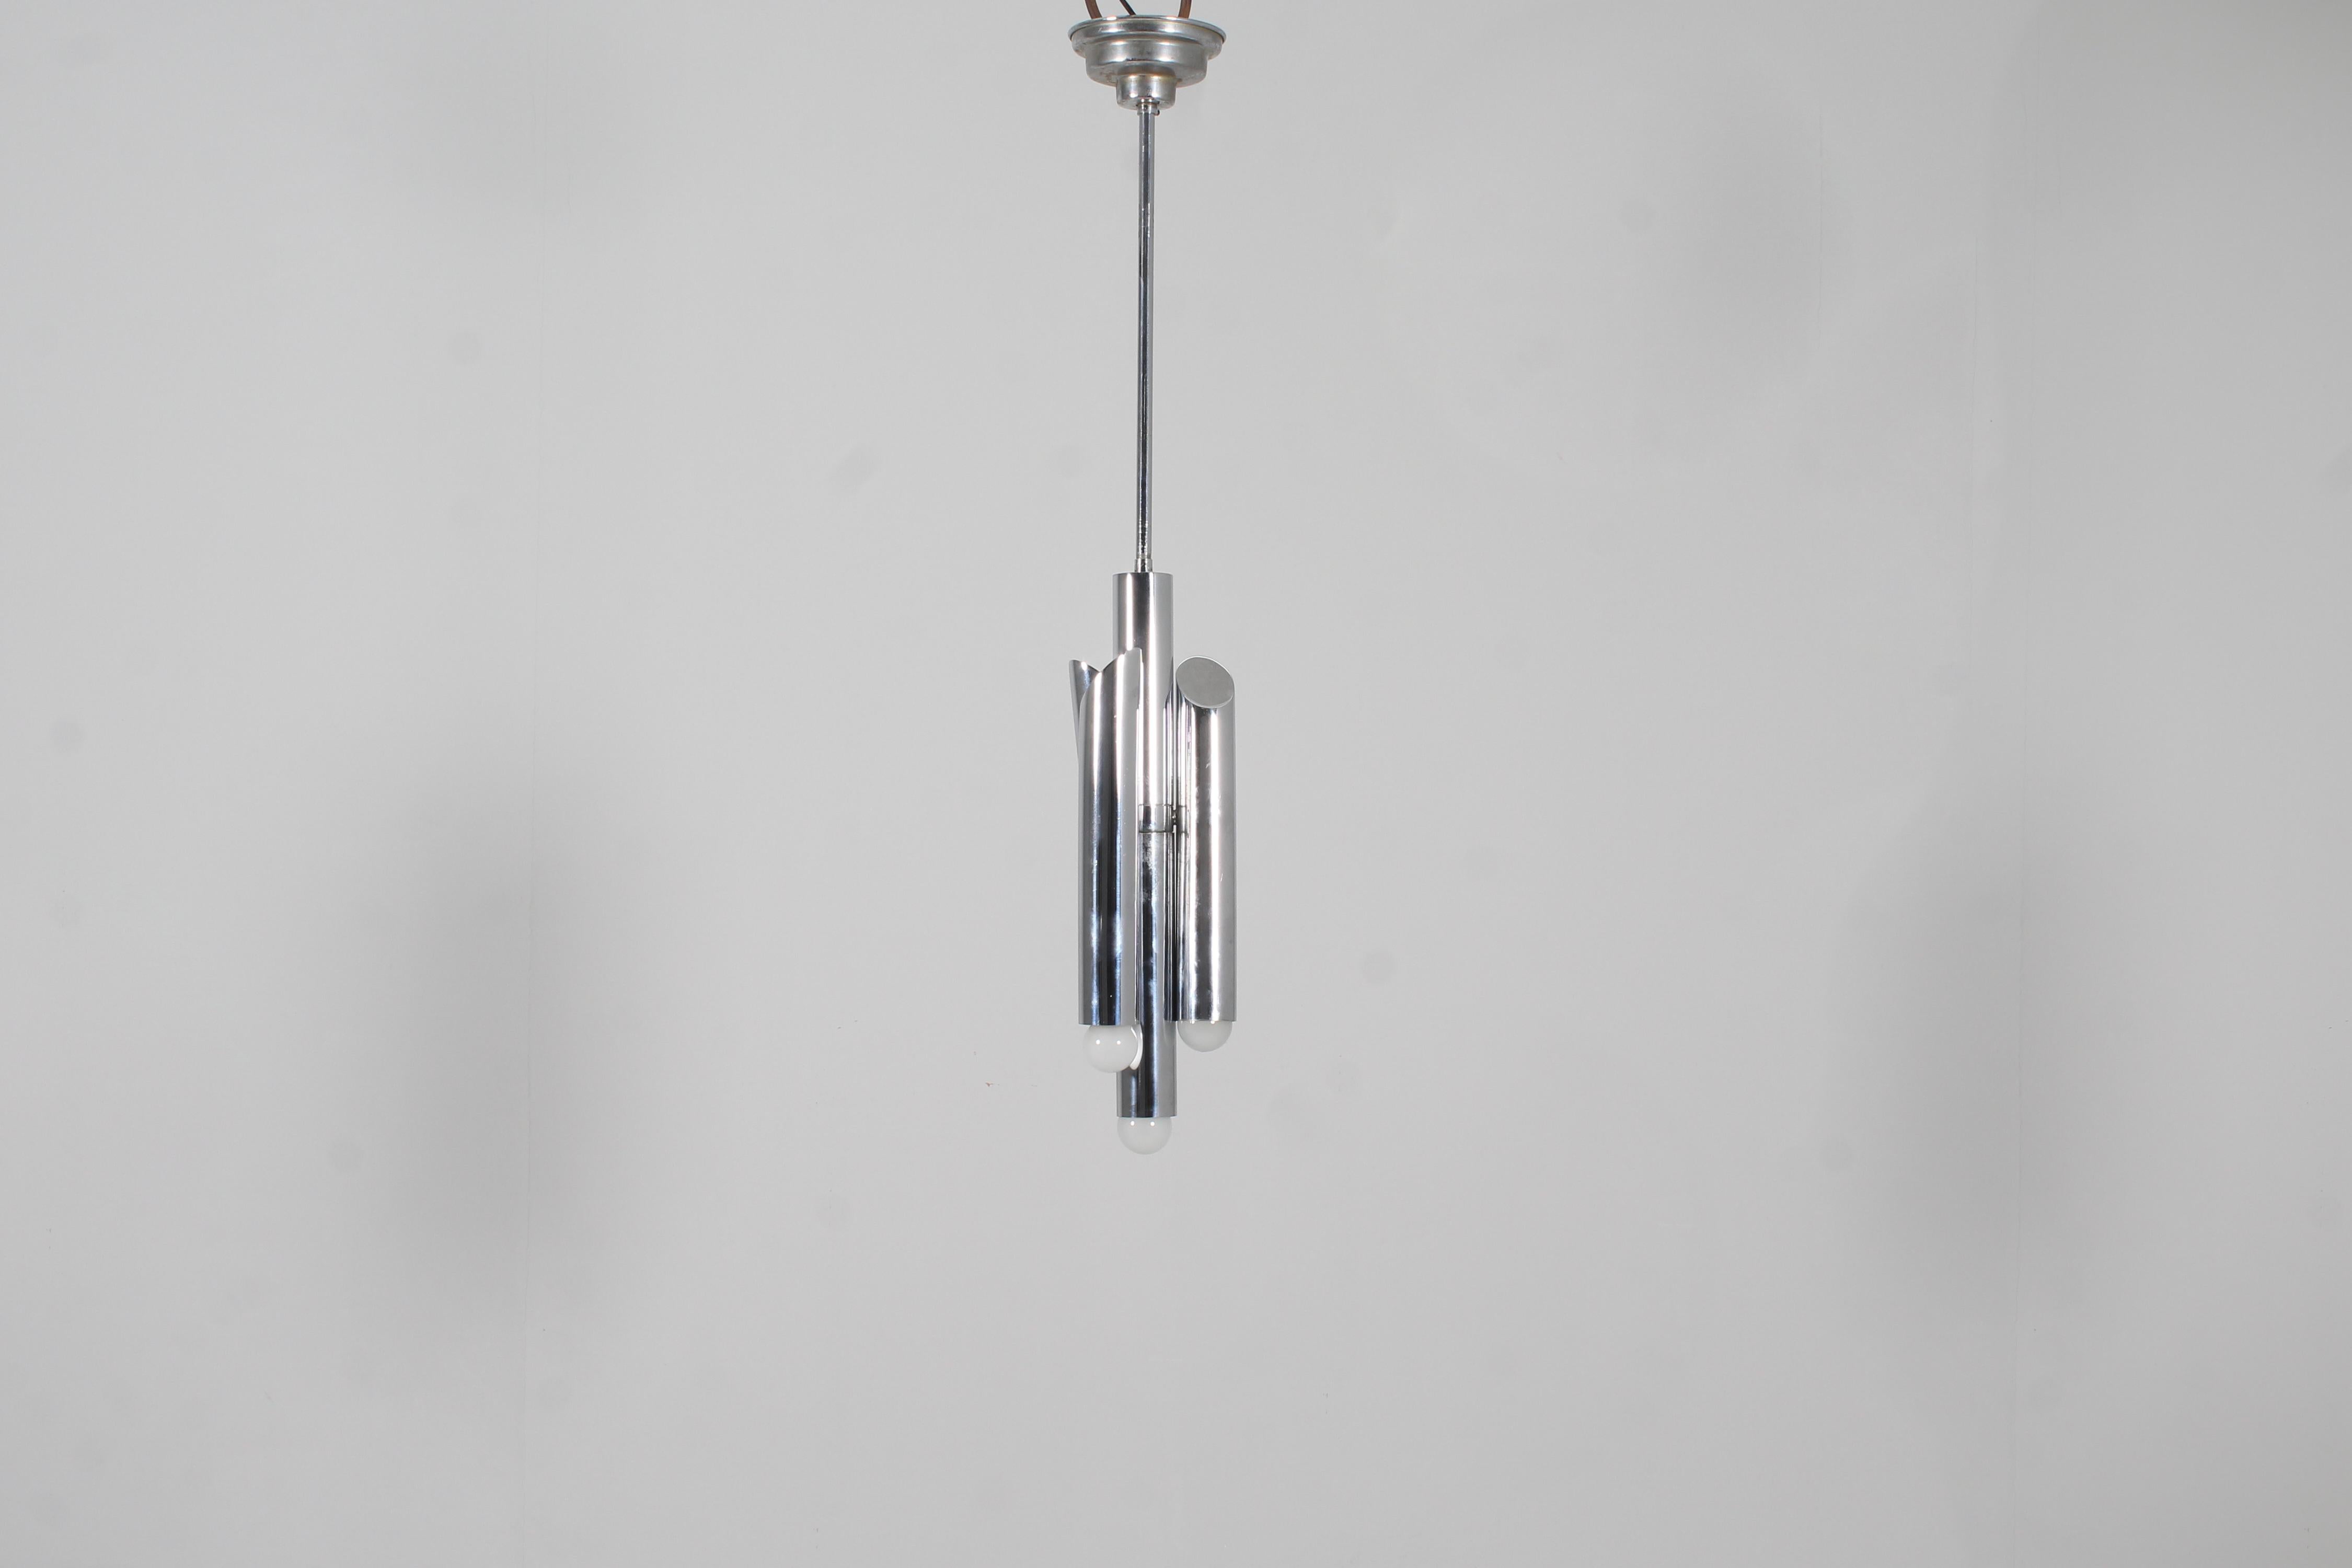 Space Age Reggiani Chromed Steel Adjustable Suspension Lamp 70s Italy For Sale 5